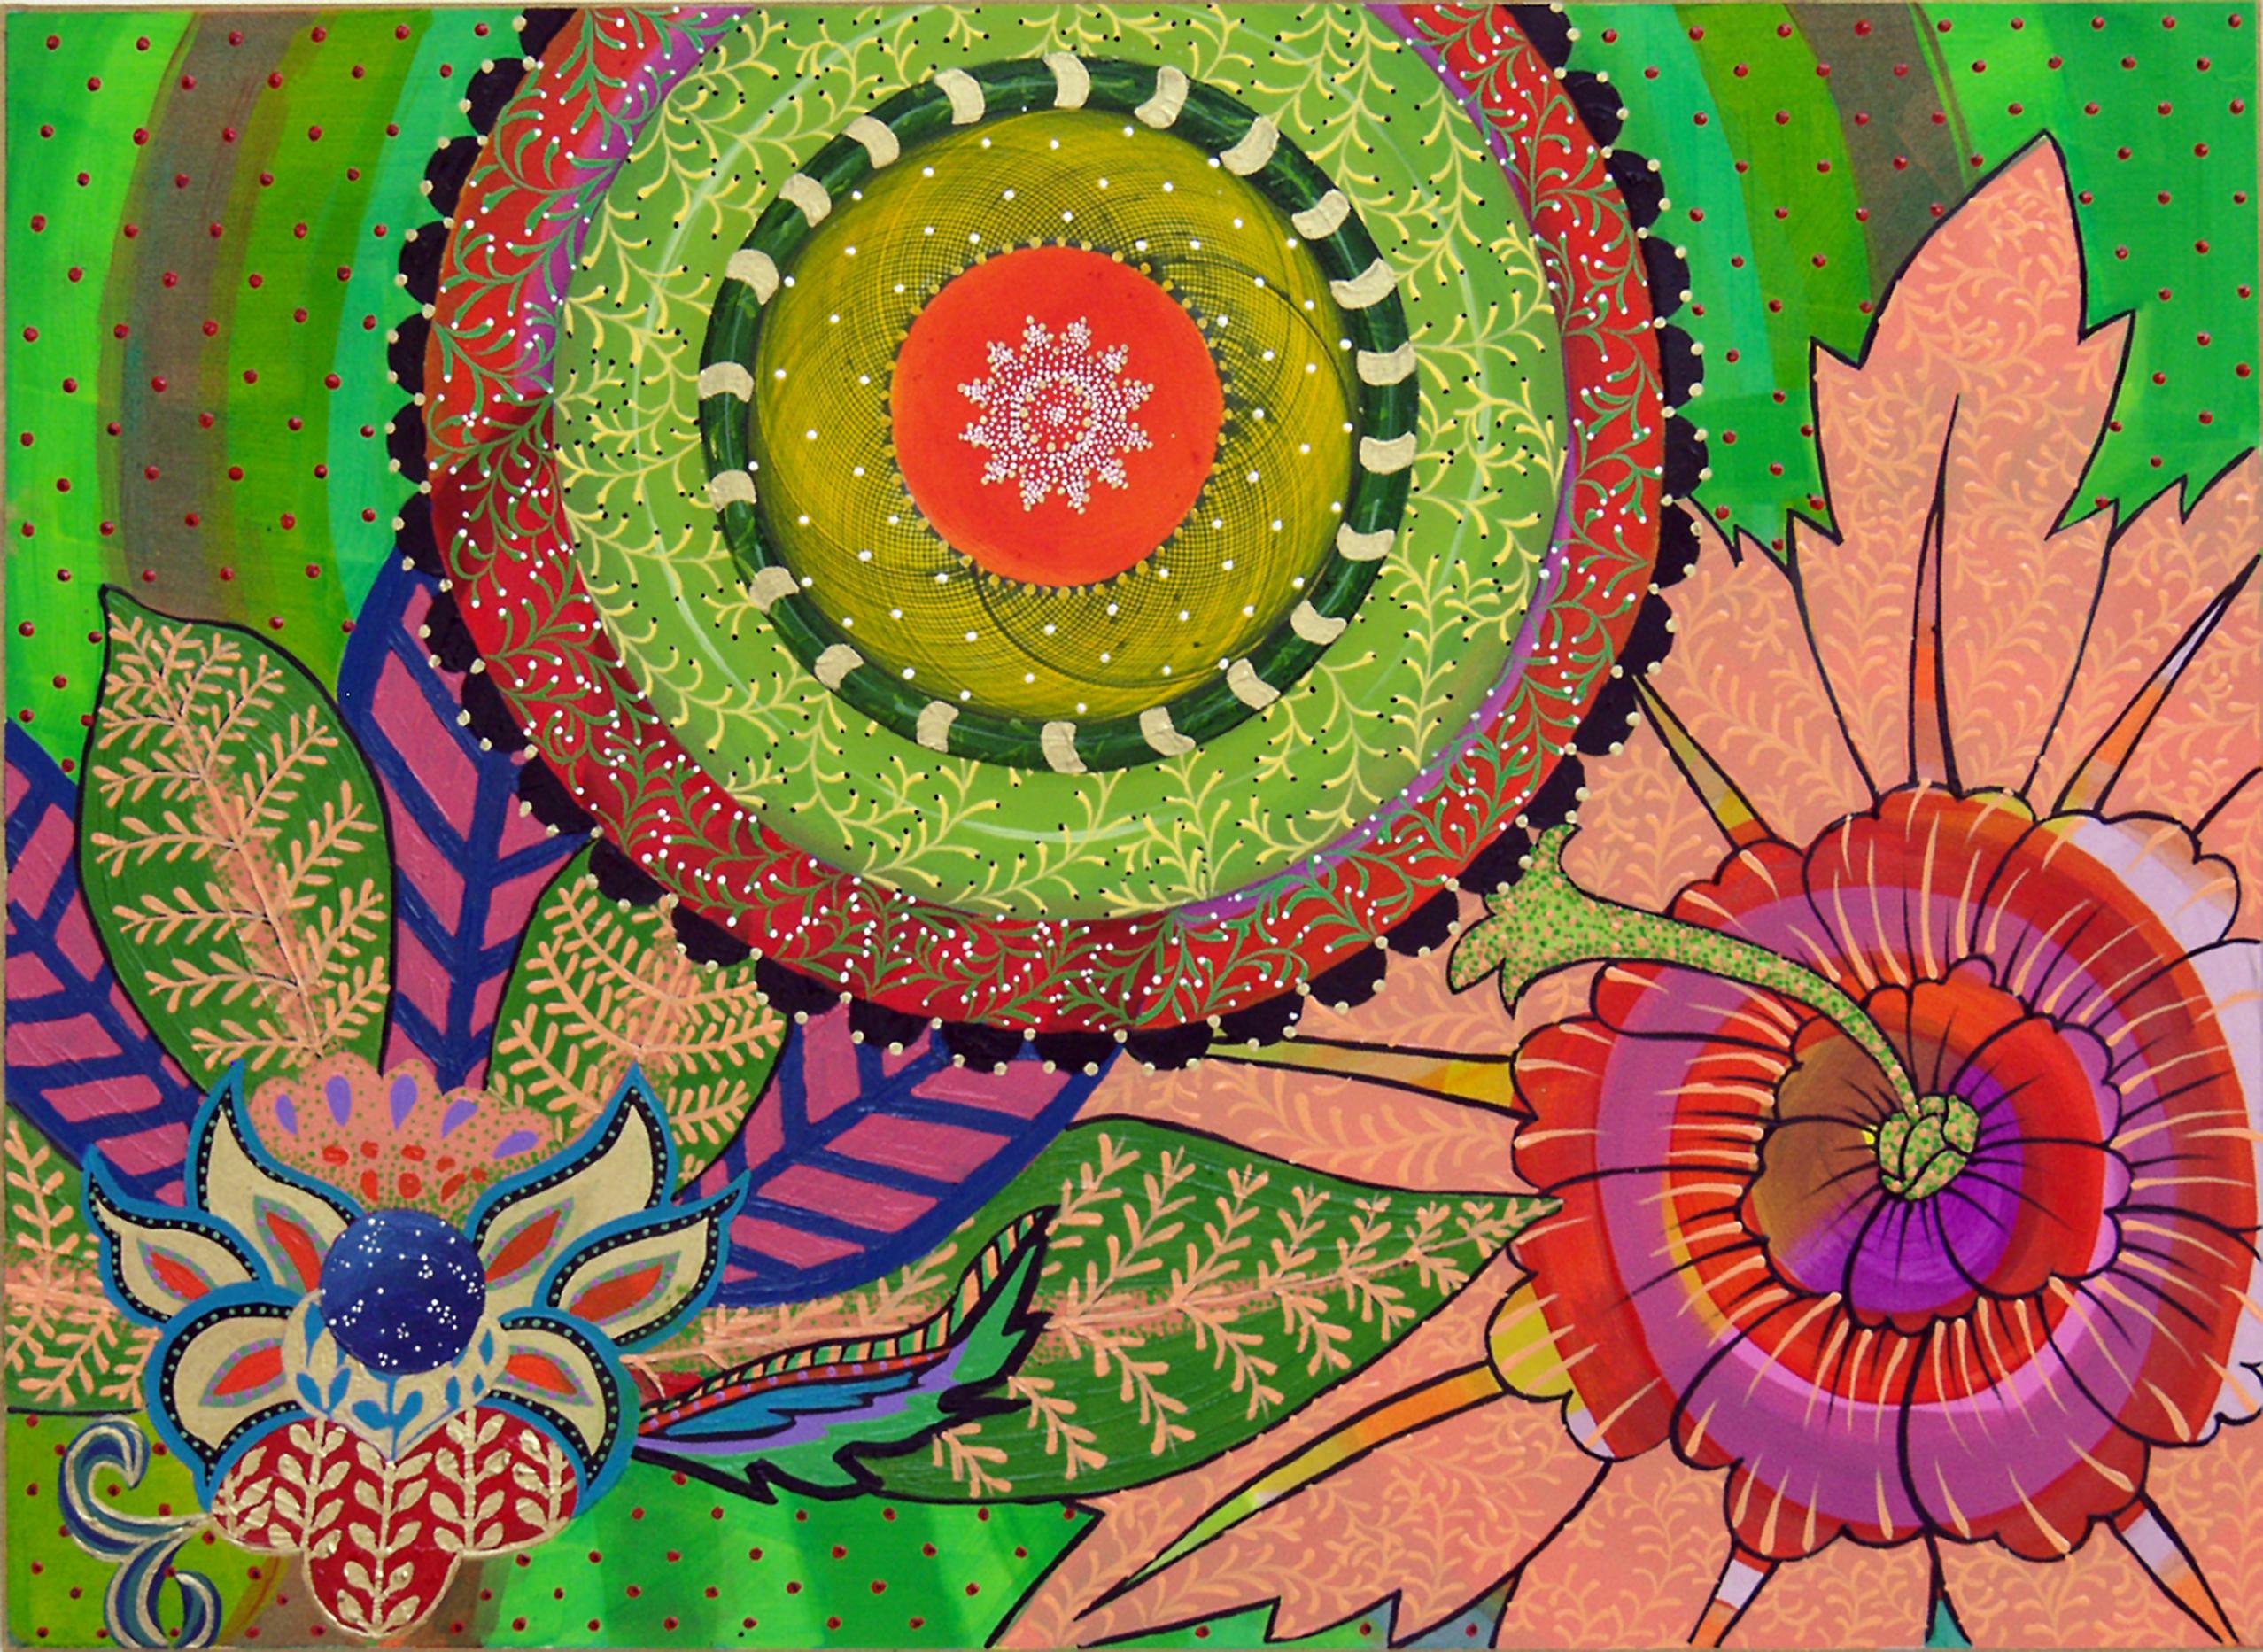 "Gorgeous With" is one of a limited edition of 30 archival pigment prints of an oil painting by Amy Cheng. The image is approachable,  ornamental, cheerful, and bright. This painting was made before the artist's Mandala series, which is